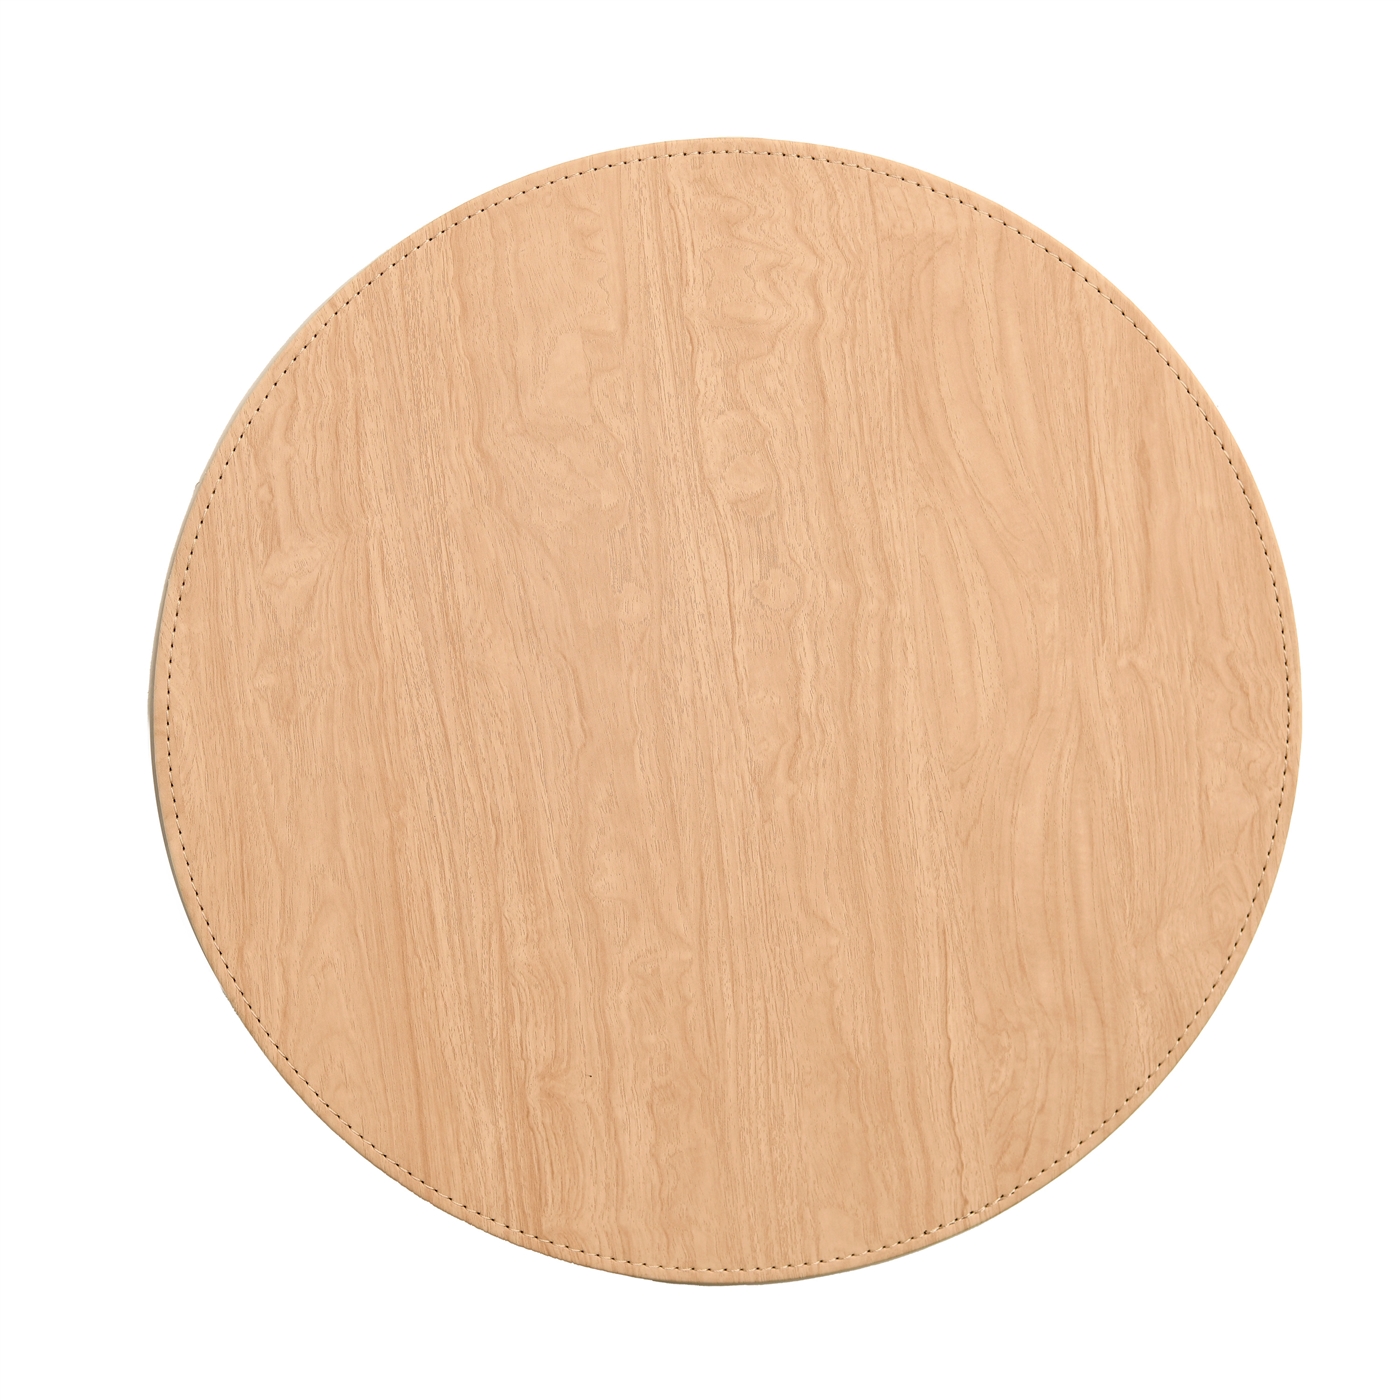 Natural Wood Round Placemat